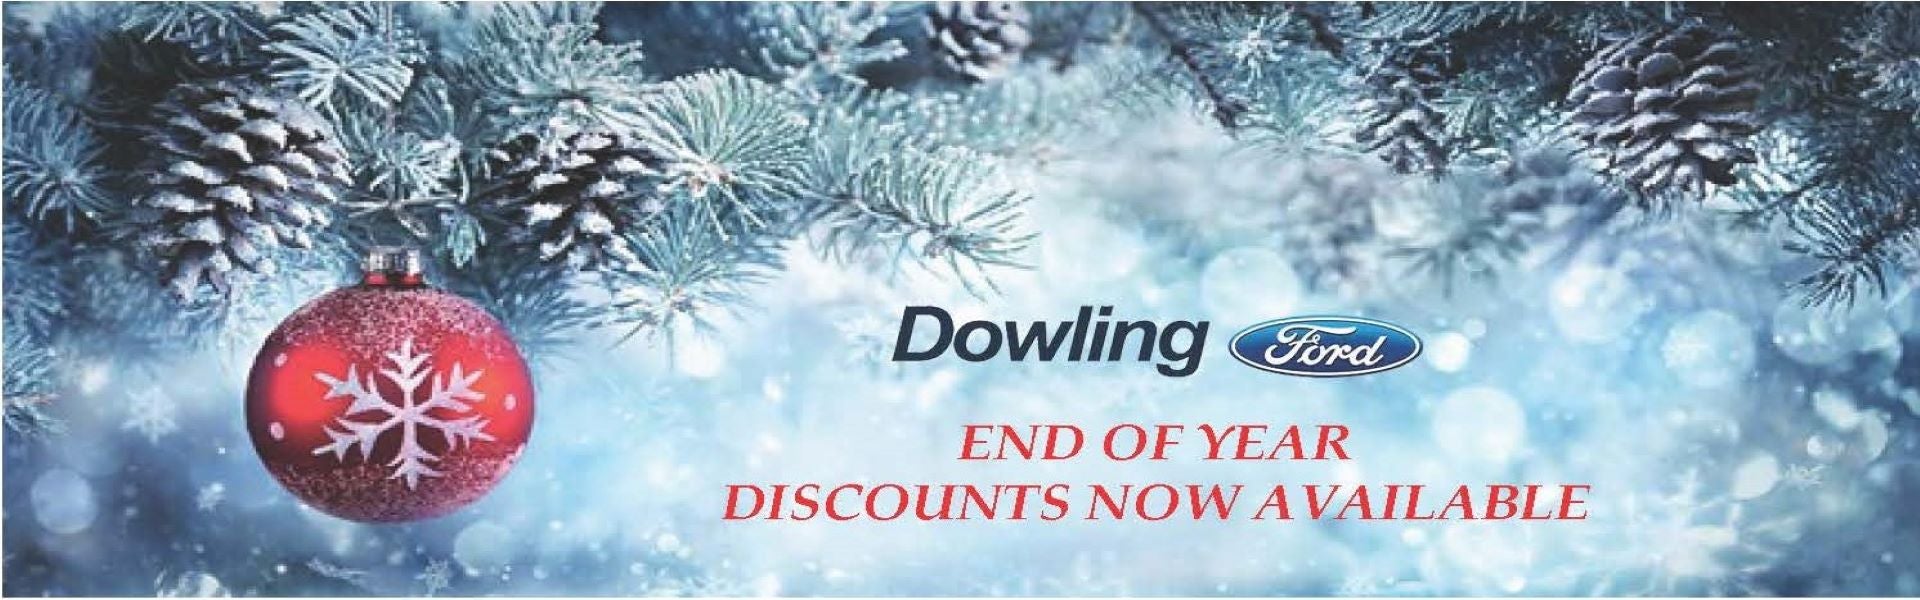 End of Year Specials